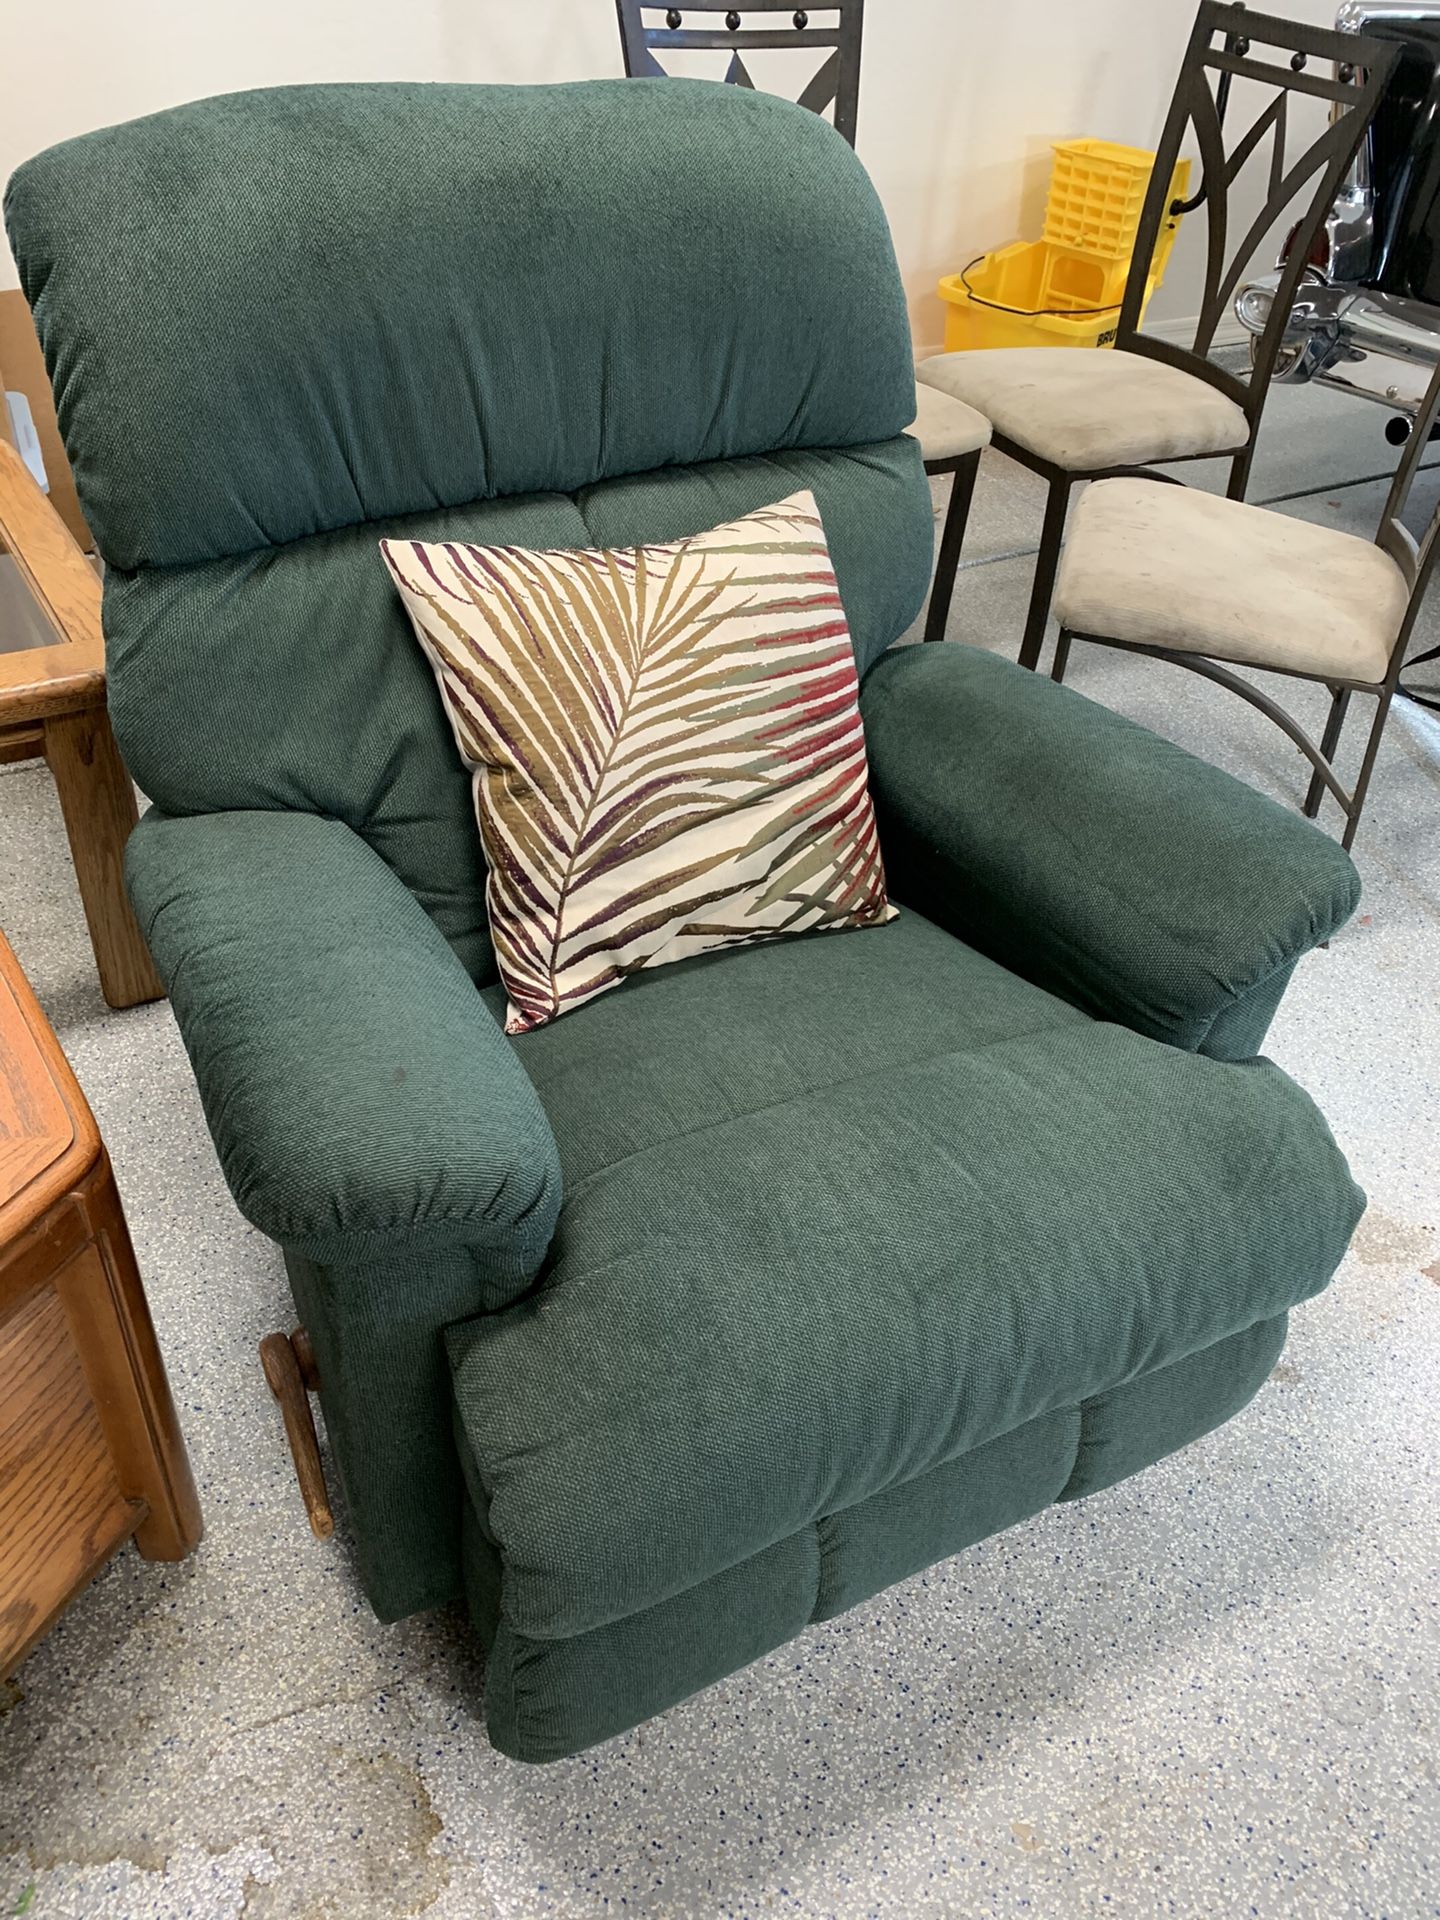 RECLINER COUCH IN EXCELLENT CONDITION!!